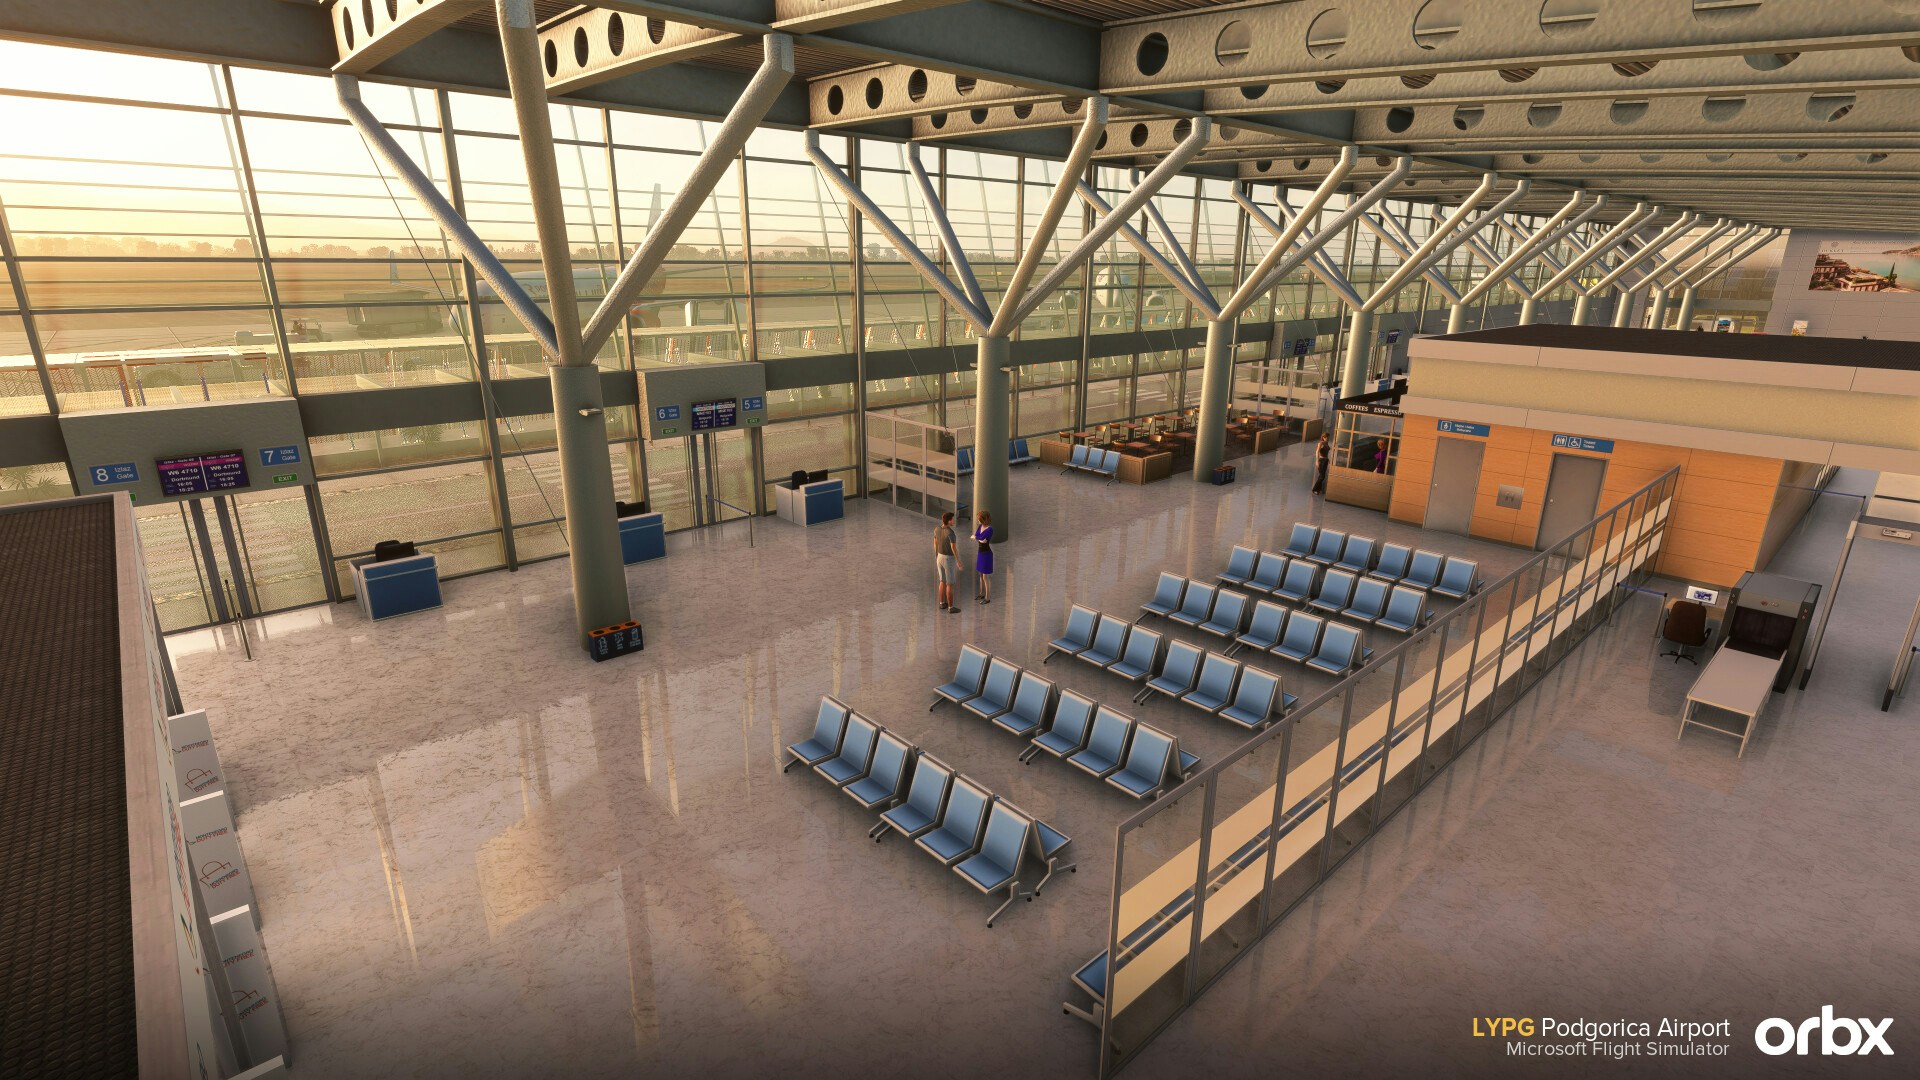 Orbx Announces LYPG Podgorica Airport for MSFS